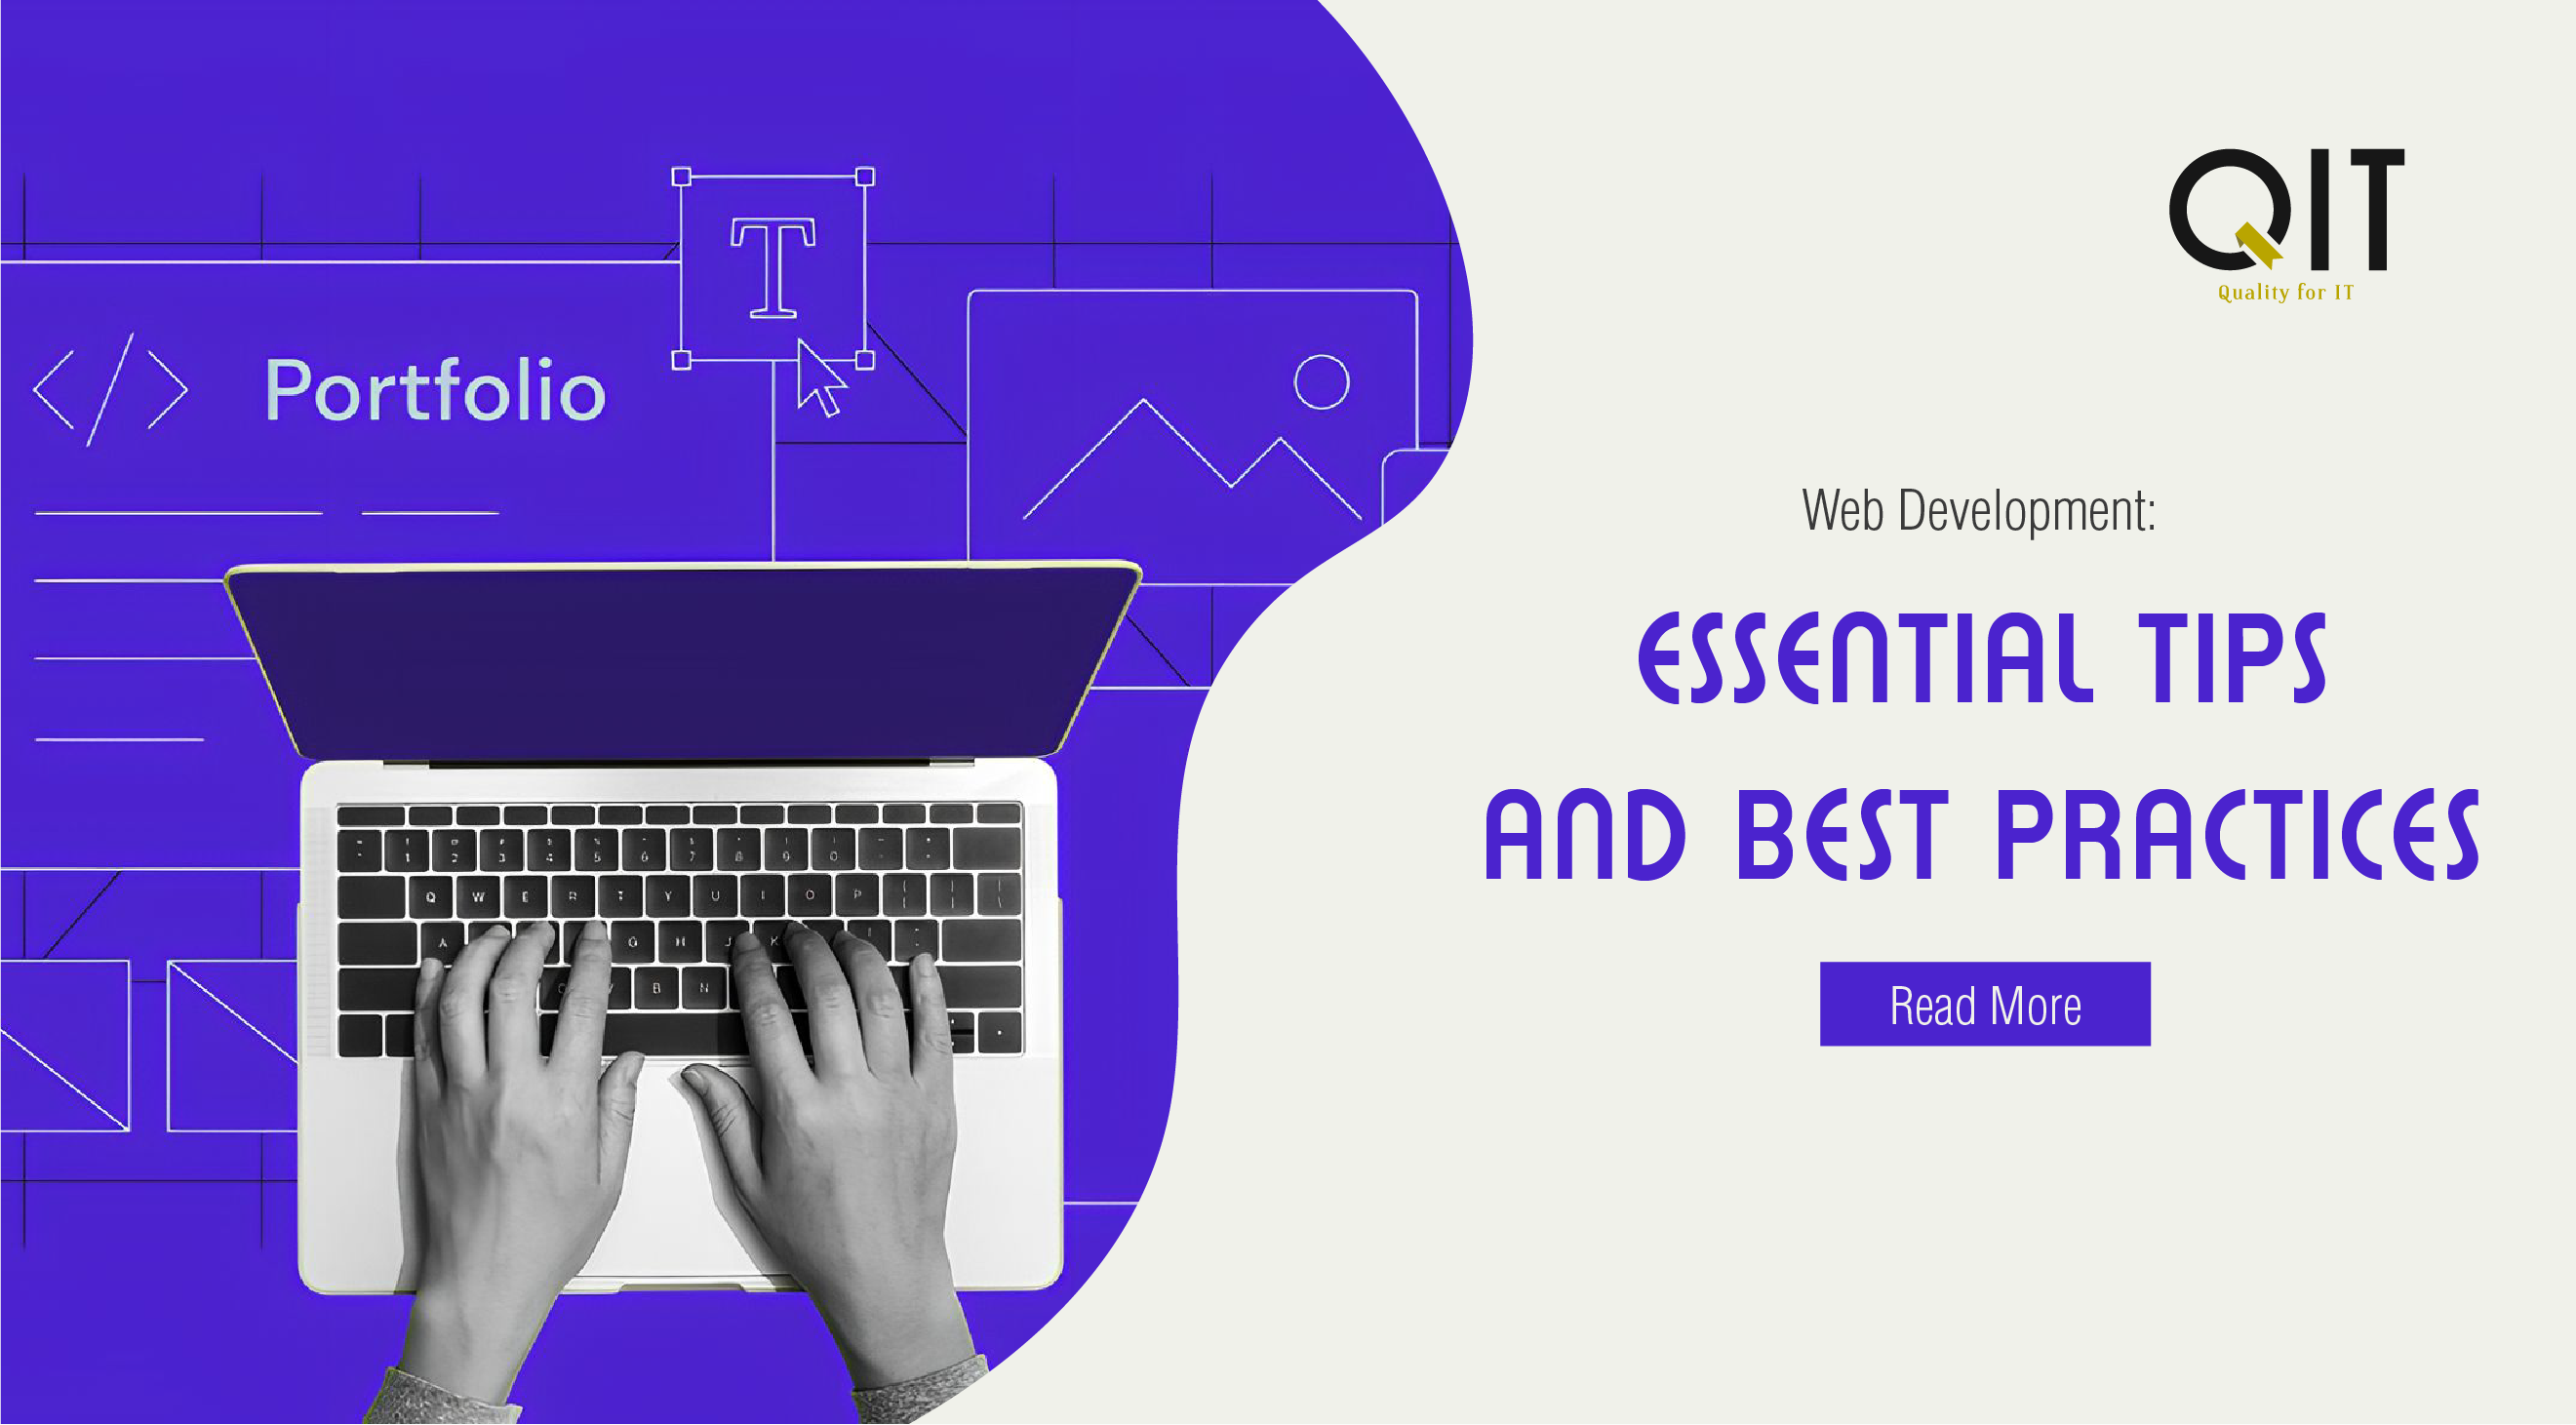 Web Development Essential Tips and Best Practices